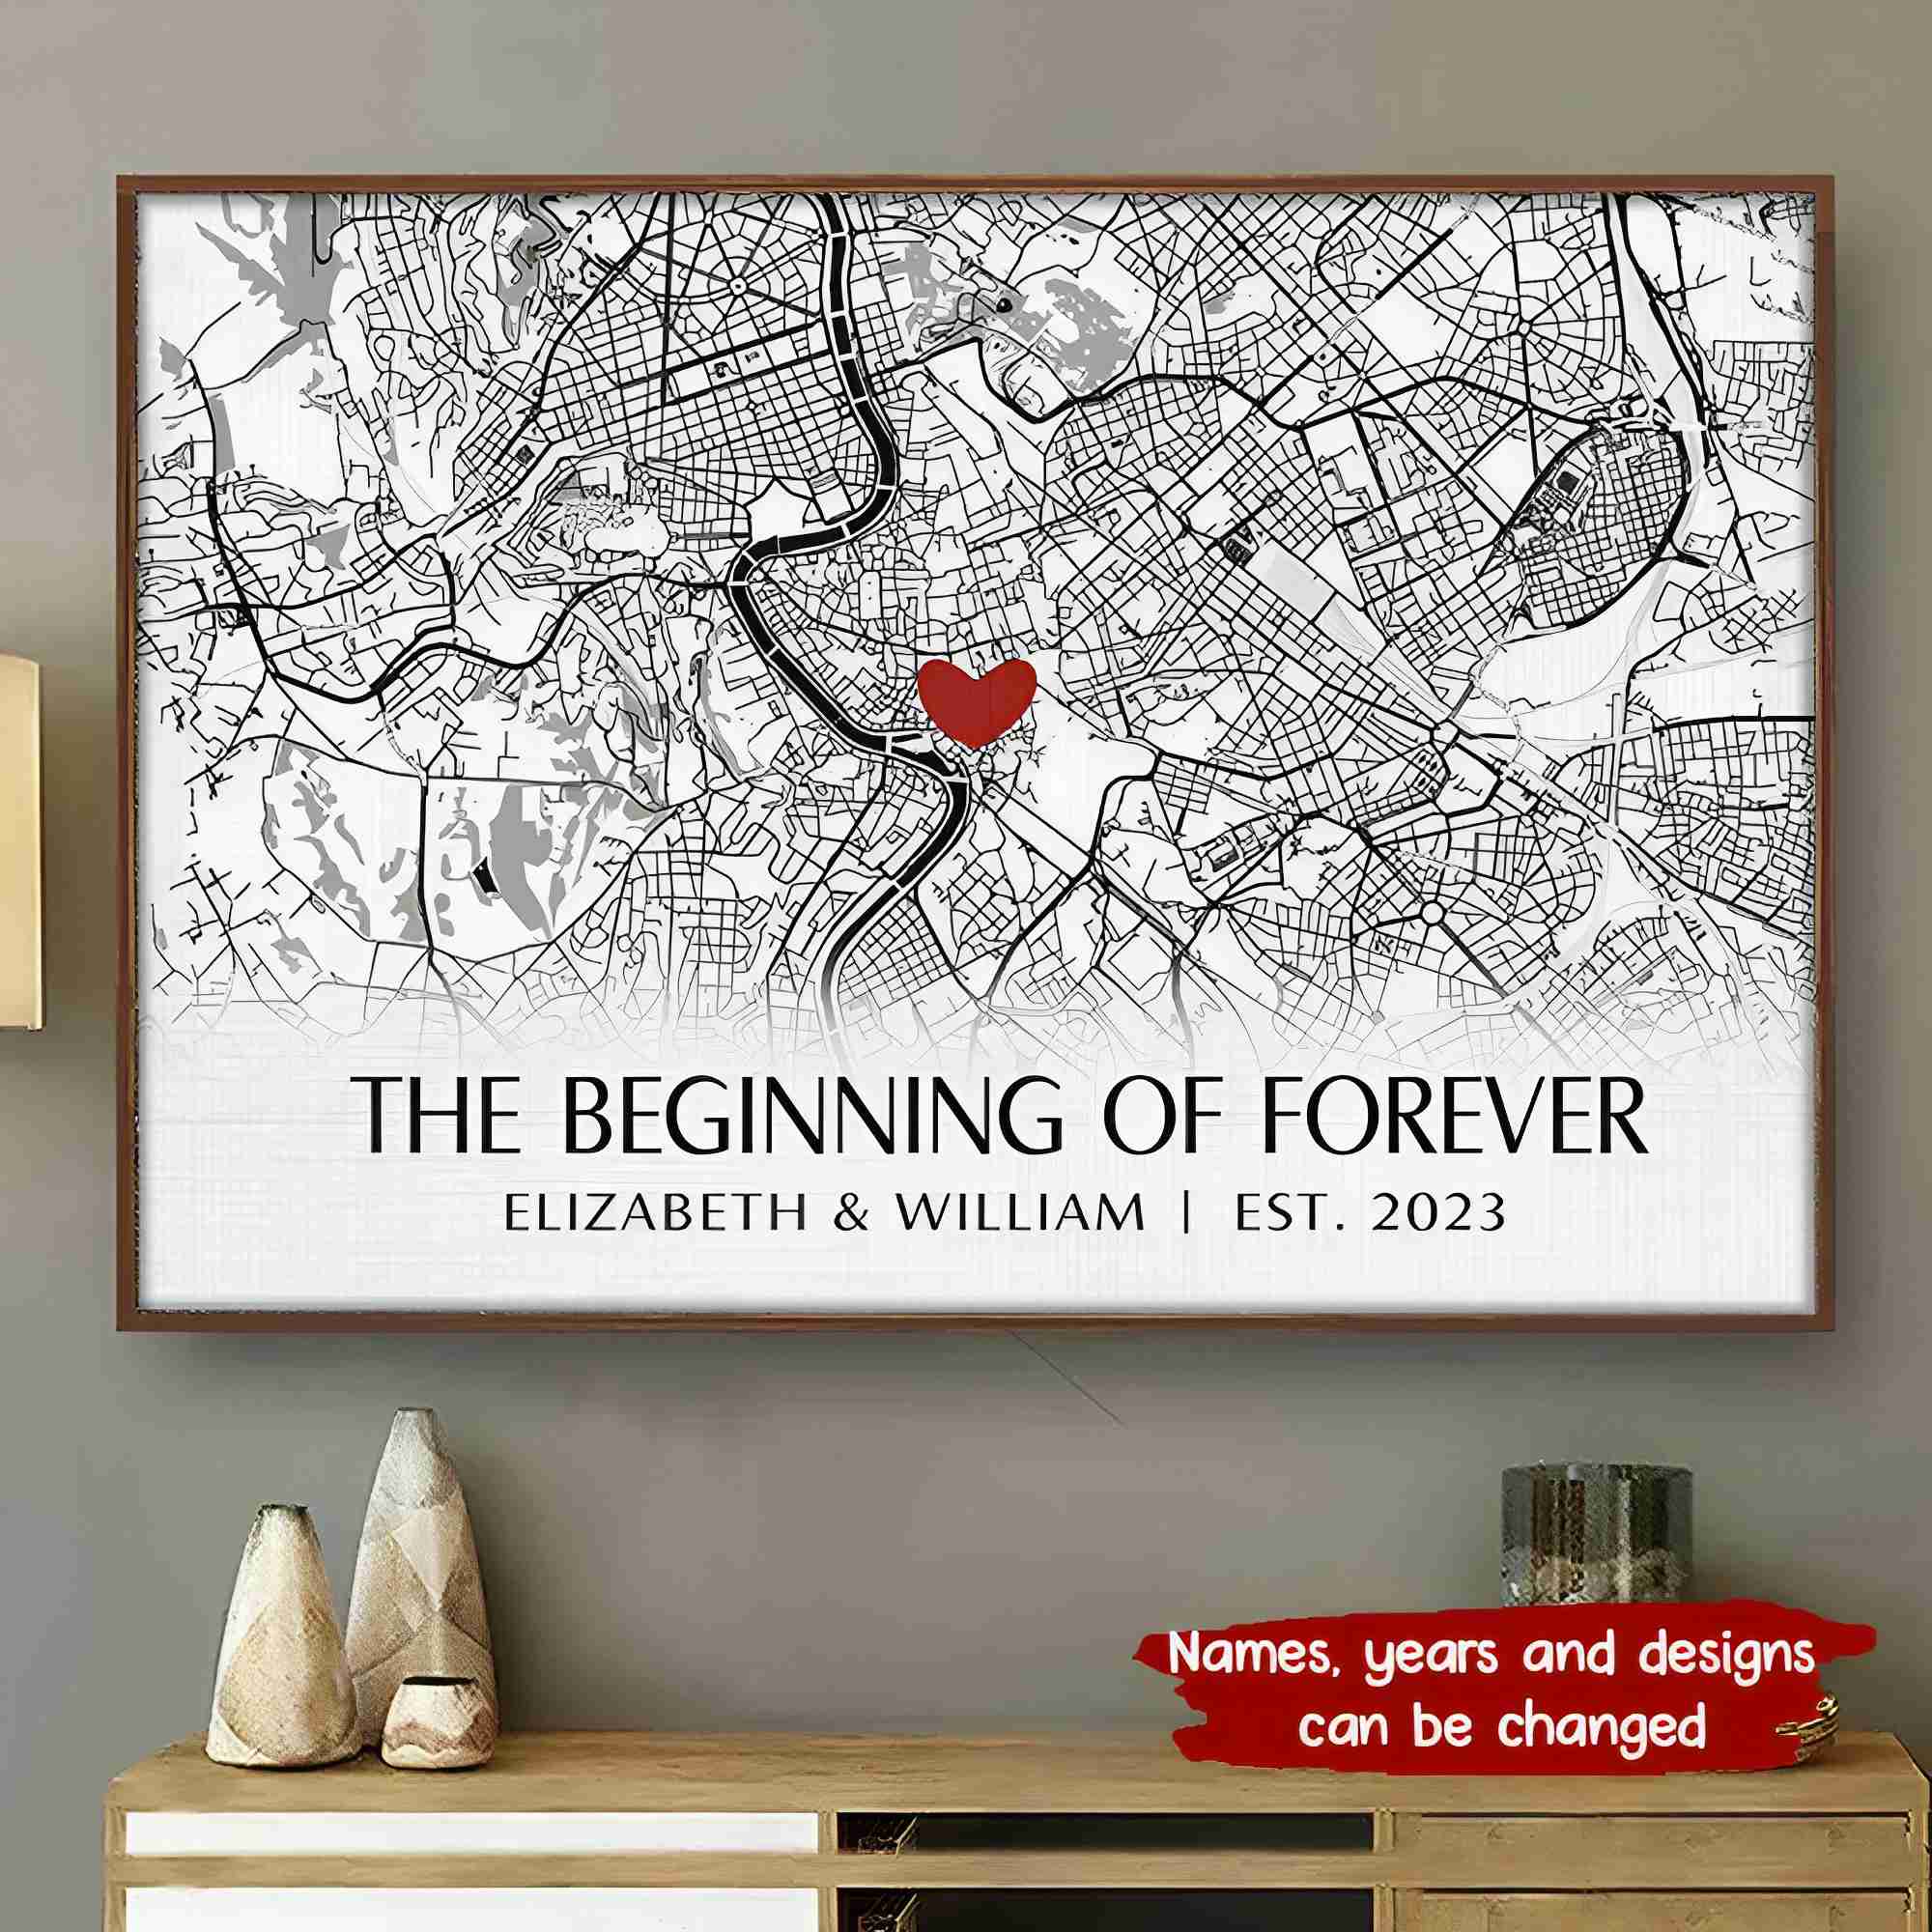 Where It All Began - Couple Personalized Custom Horizontal Poster - Gift For Husband Wife, Anniversary